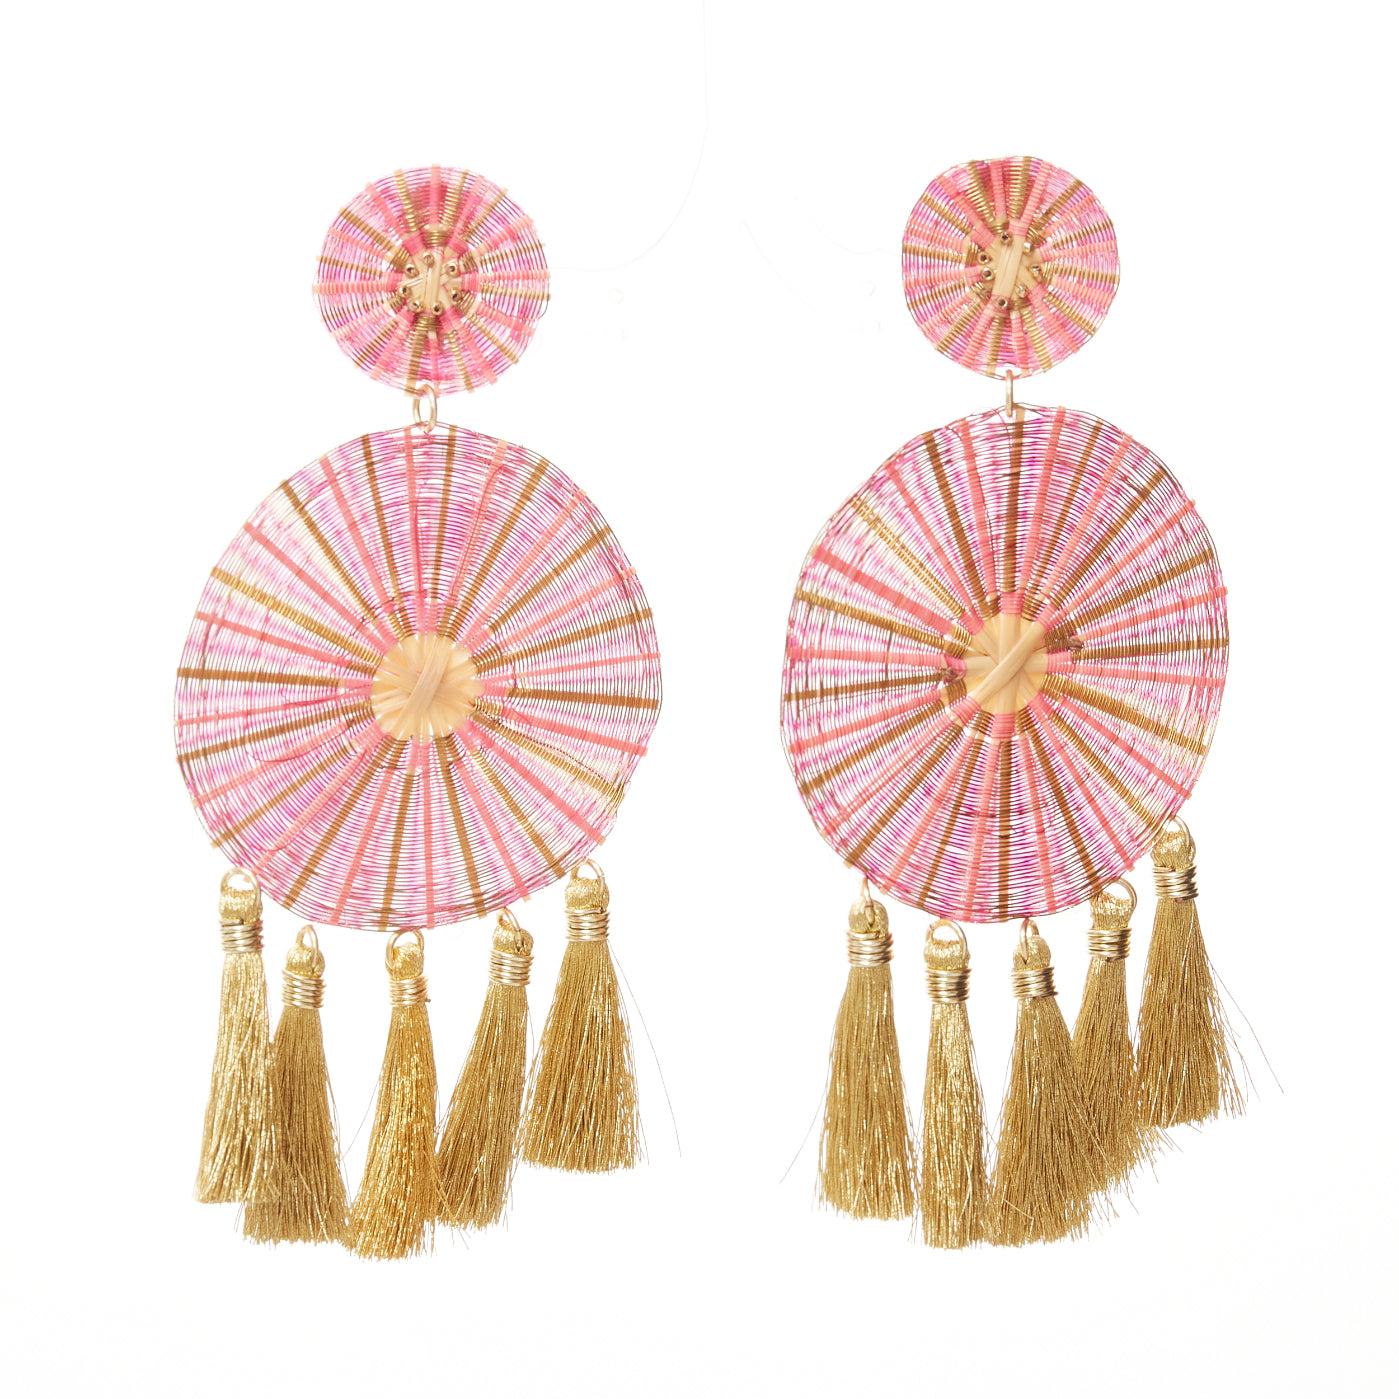 MERCEDES SALAZAR gold pink metal applique tassel clip on earrings
Reference: AAWC/A01248
Brand: Mercedes Salazar
Material: Metal, Fabric
Color: Gold
Pattern: Solid
Closure: Clip On
Lining: Gold Metal
Extra Details: Logo at one of the